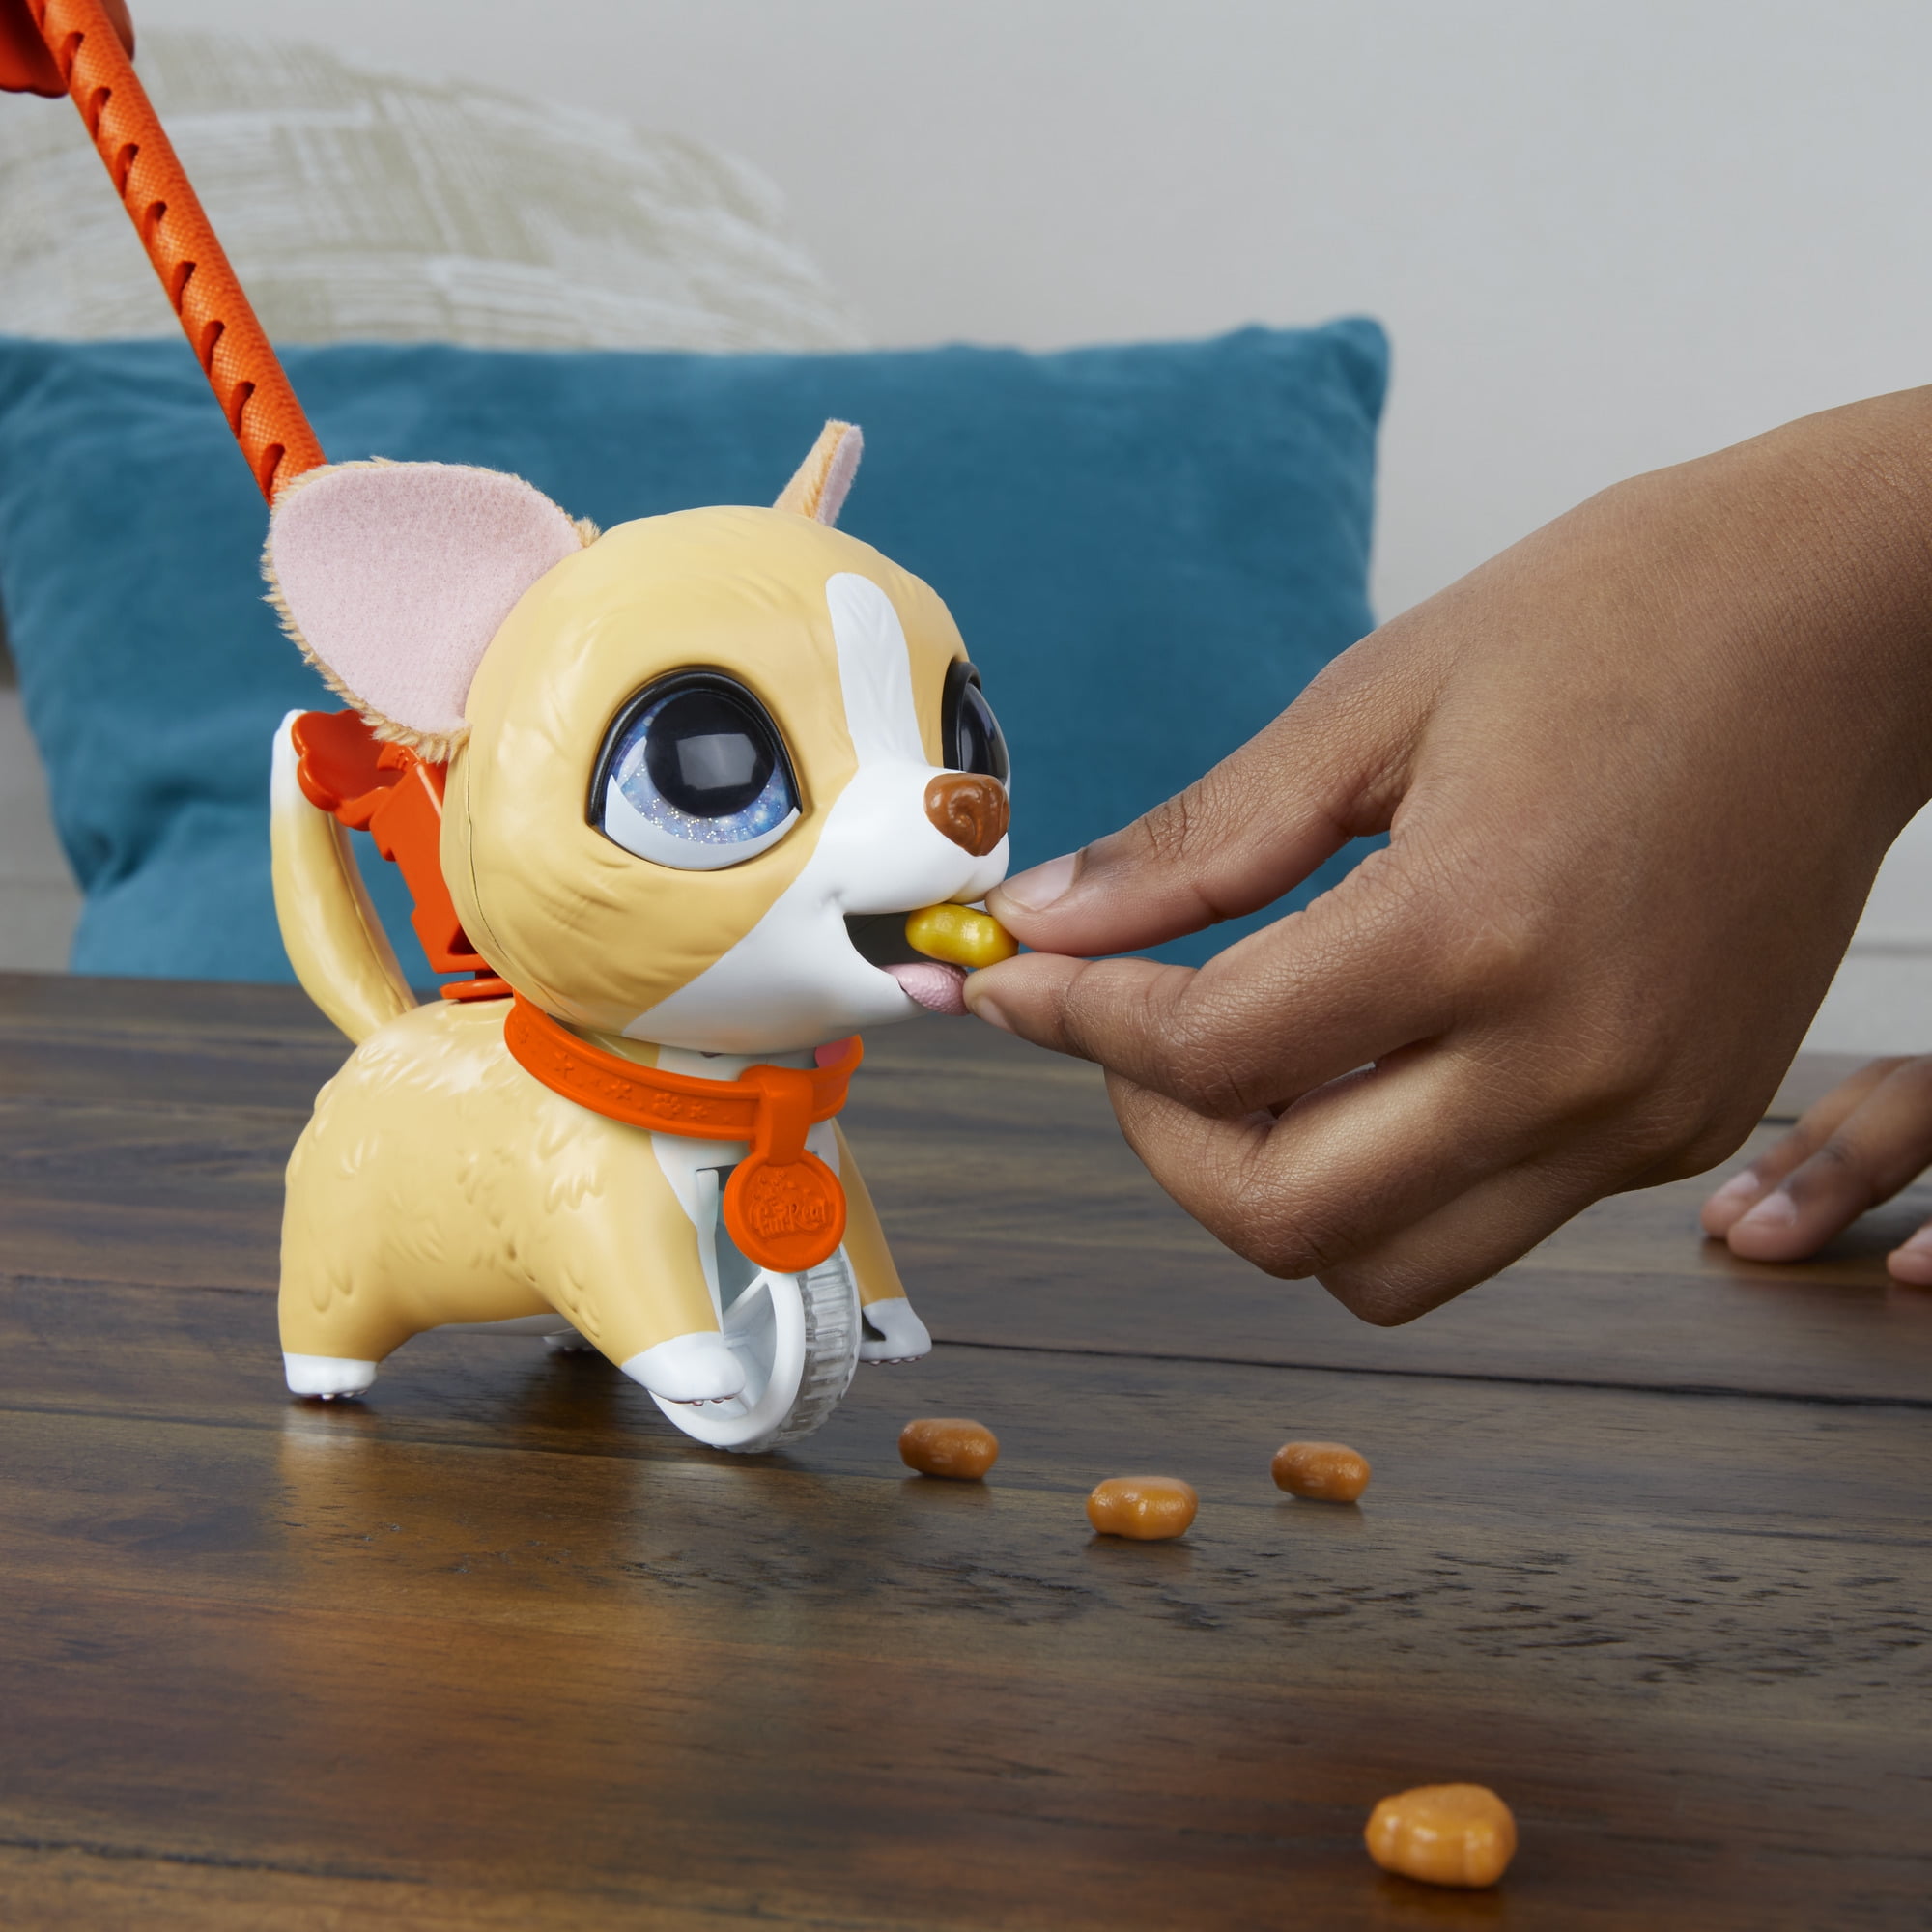 CONNECTIBLE LEASH SYSTEM CORGI PUP FURREAL POOPALOTS LIL' WAGS INTERACTIVE TOY 